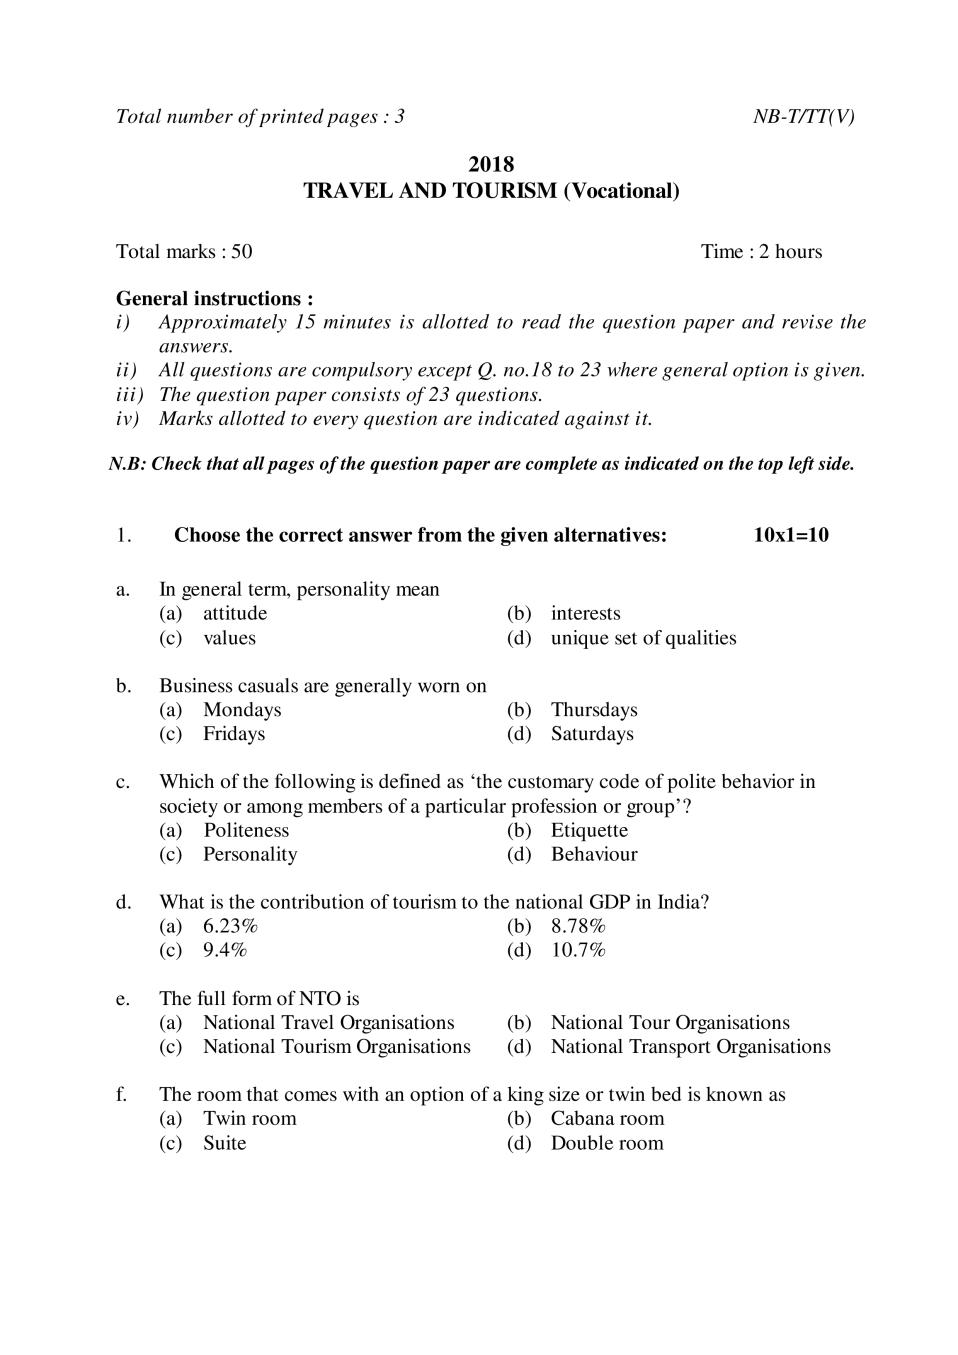 NBSE Class 10 Question Paper 2018 for Travel Tourism - Page 1